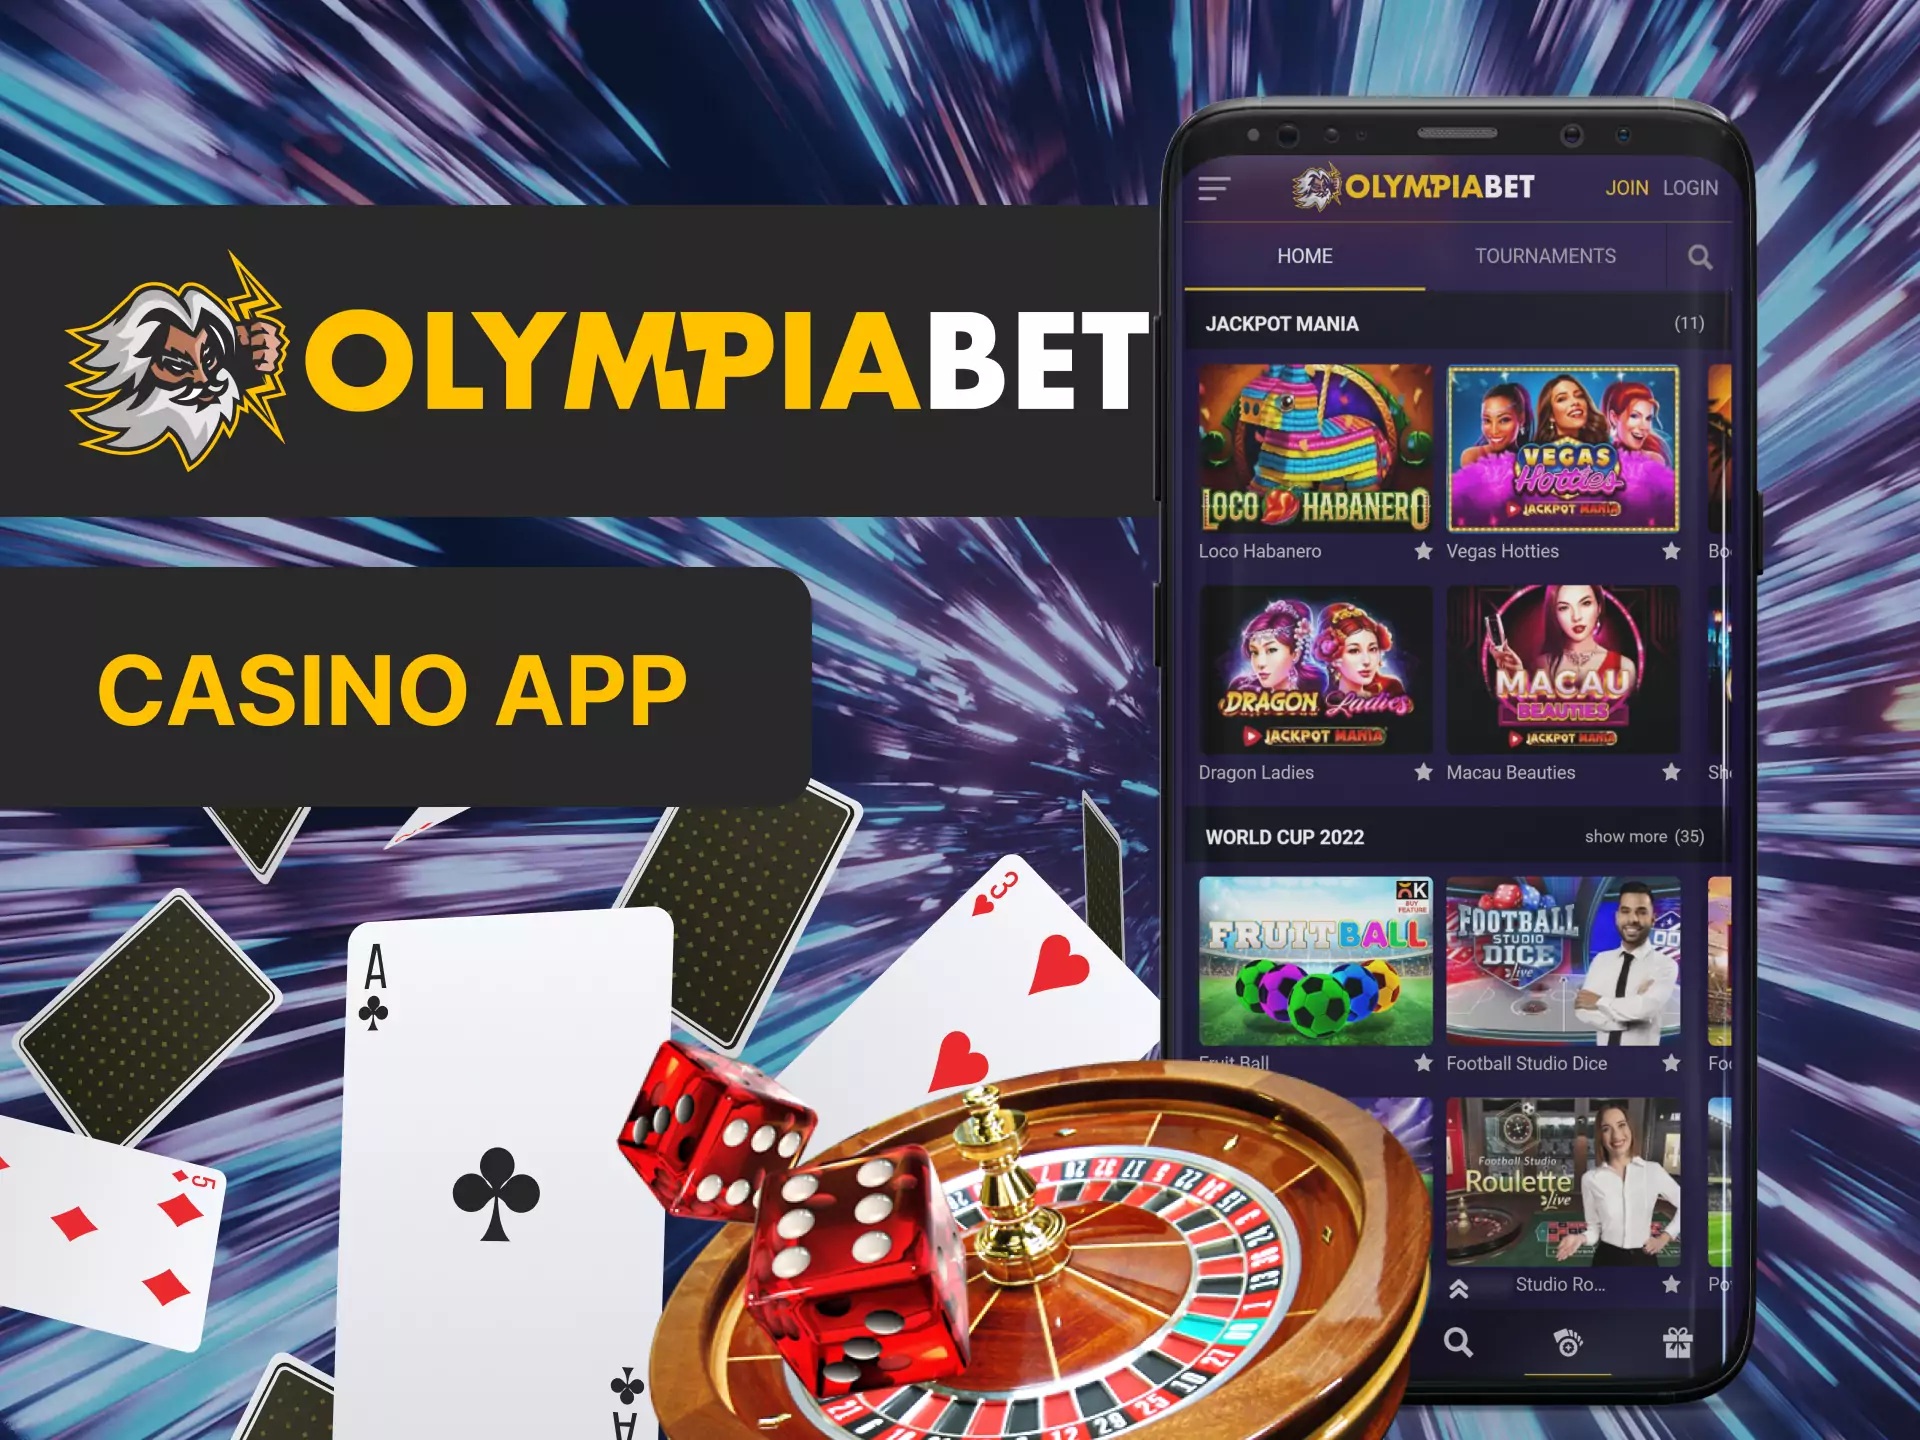 In the OlympiaBet app, play casino, place bets on roulette, baccarat, blackjack and other types.